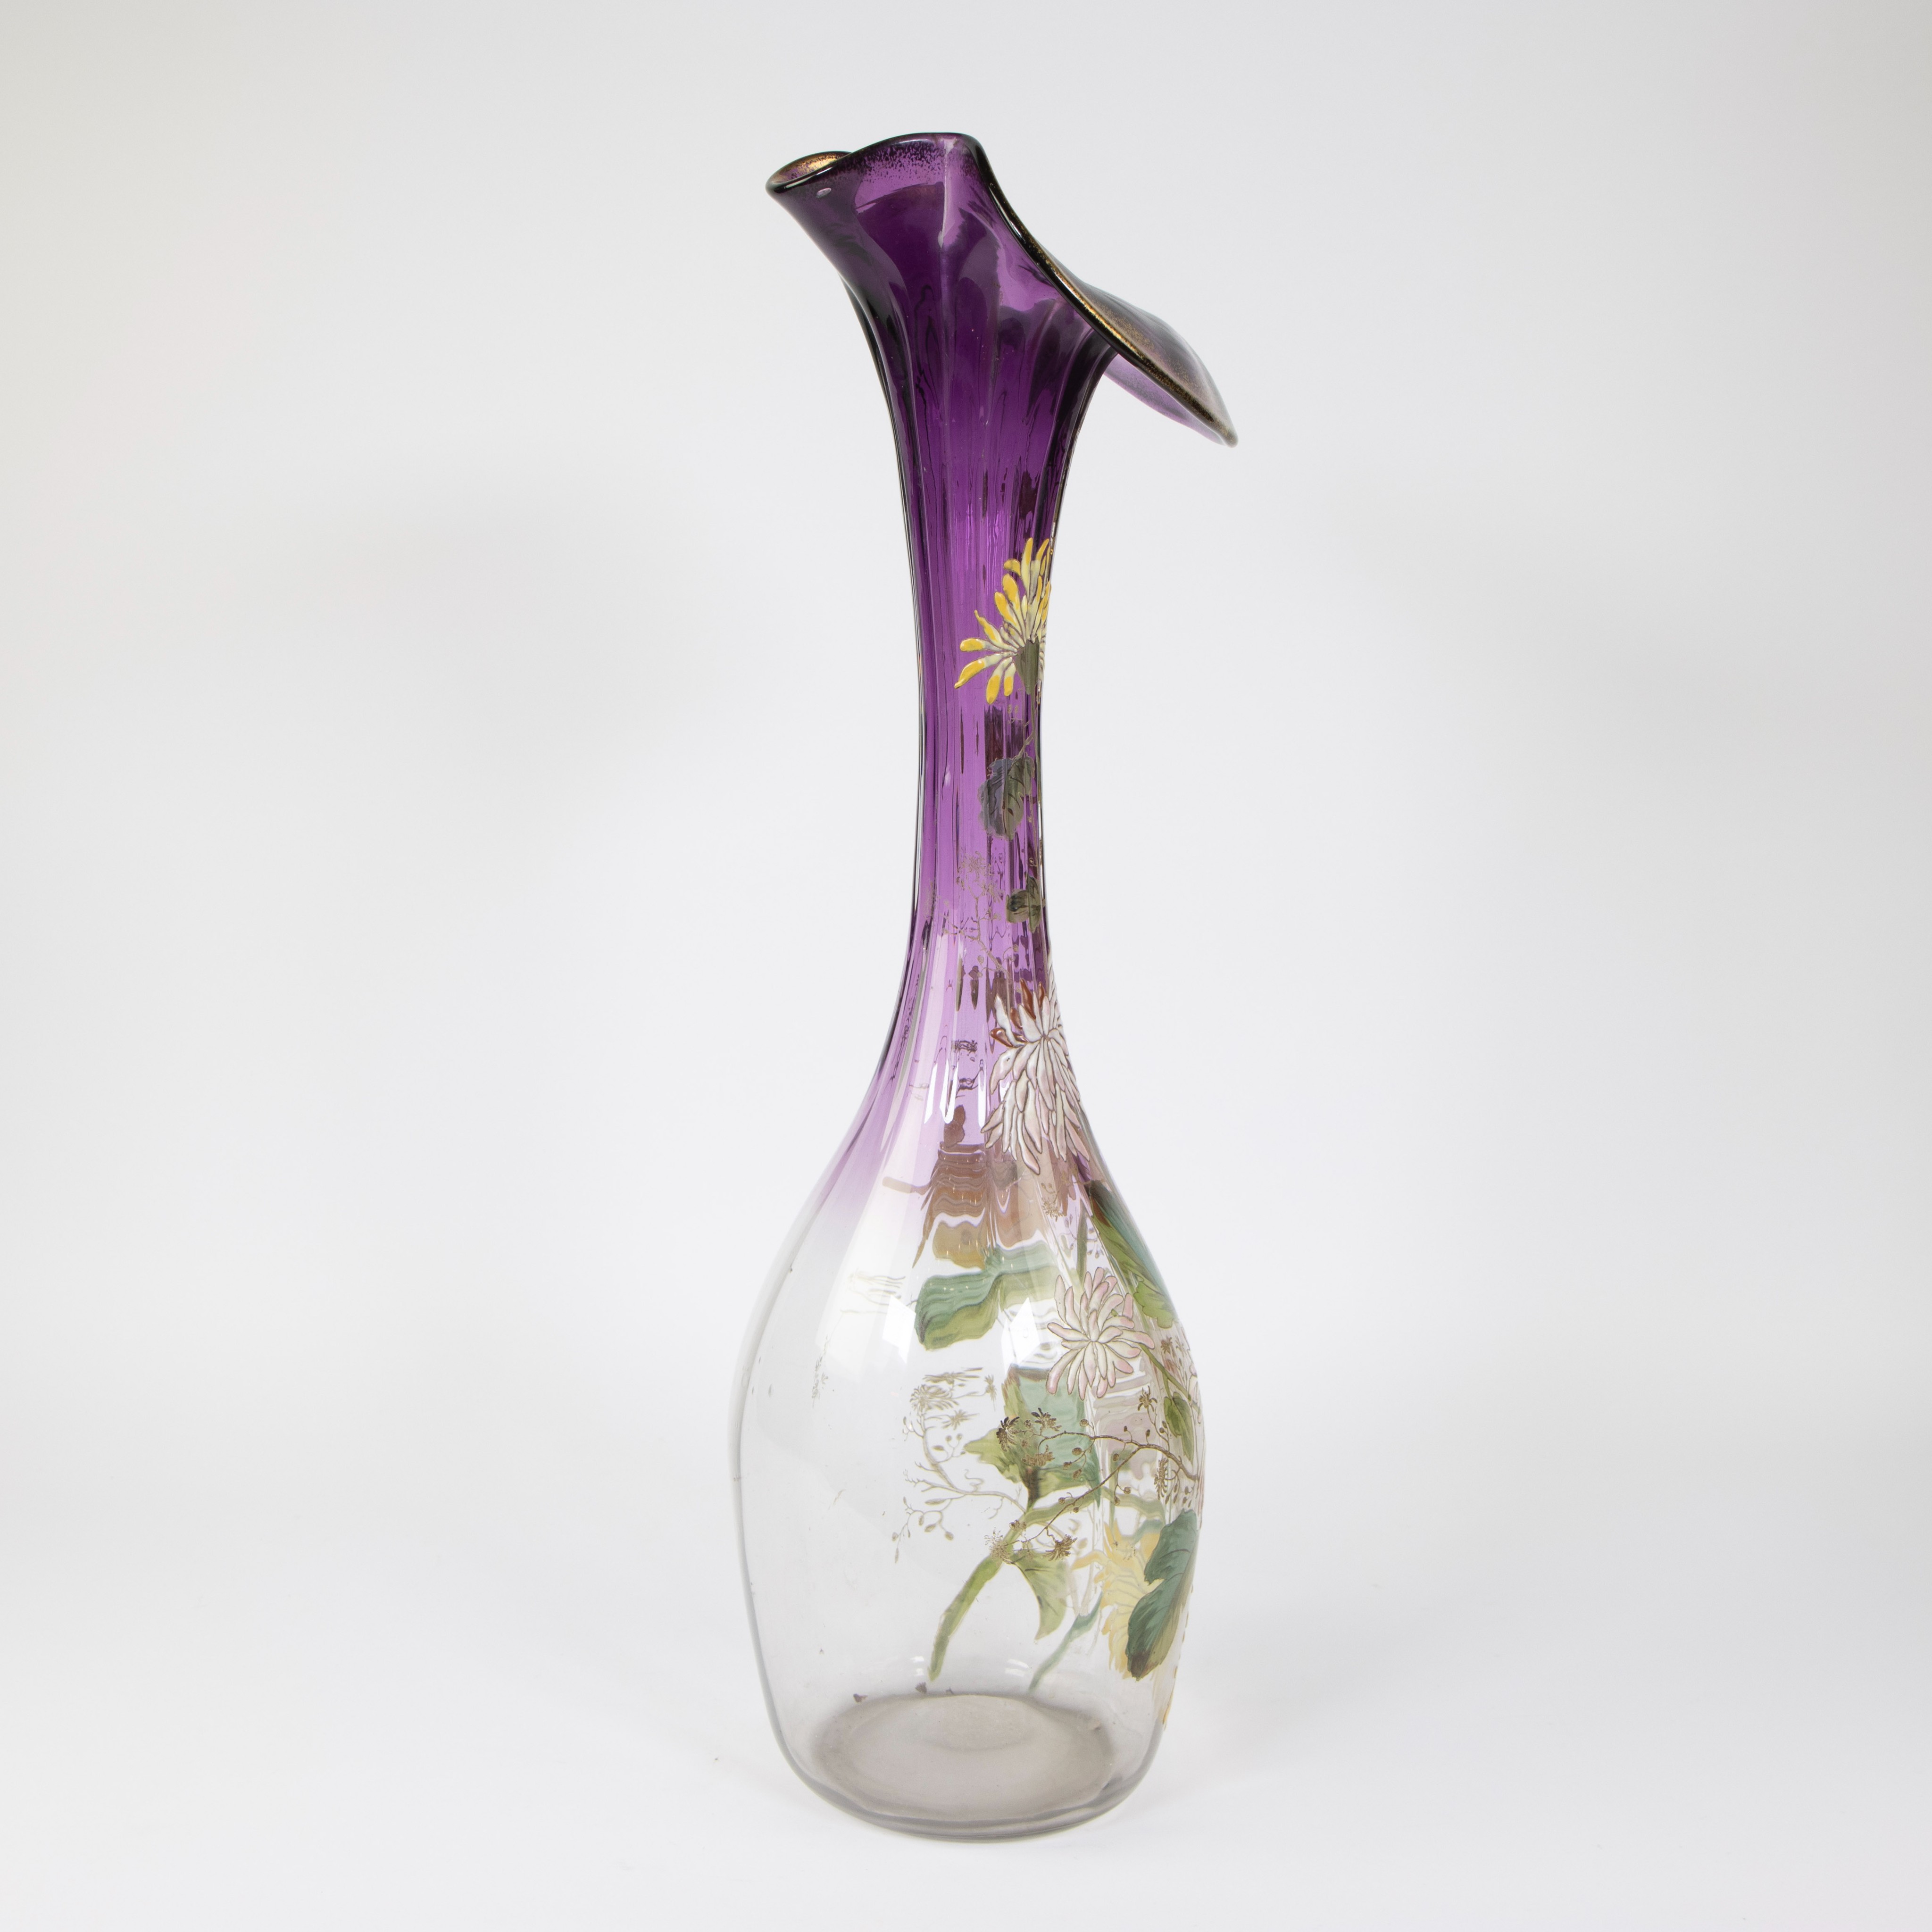 Art Nouveau style vase attributed to François-Théodore LEGRAS (1839-1916), with orchid-shaped collar - Image 4 of 5